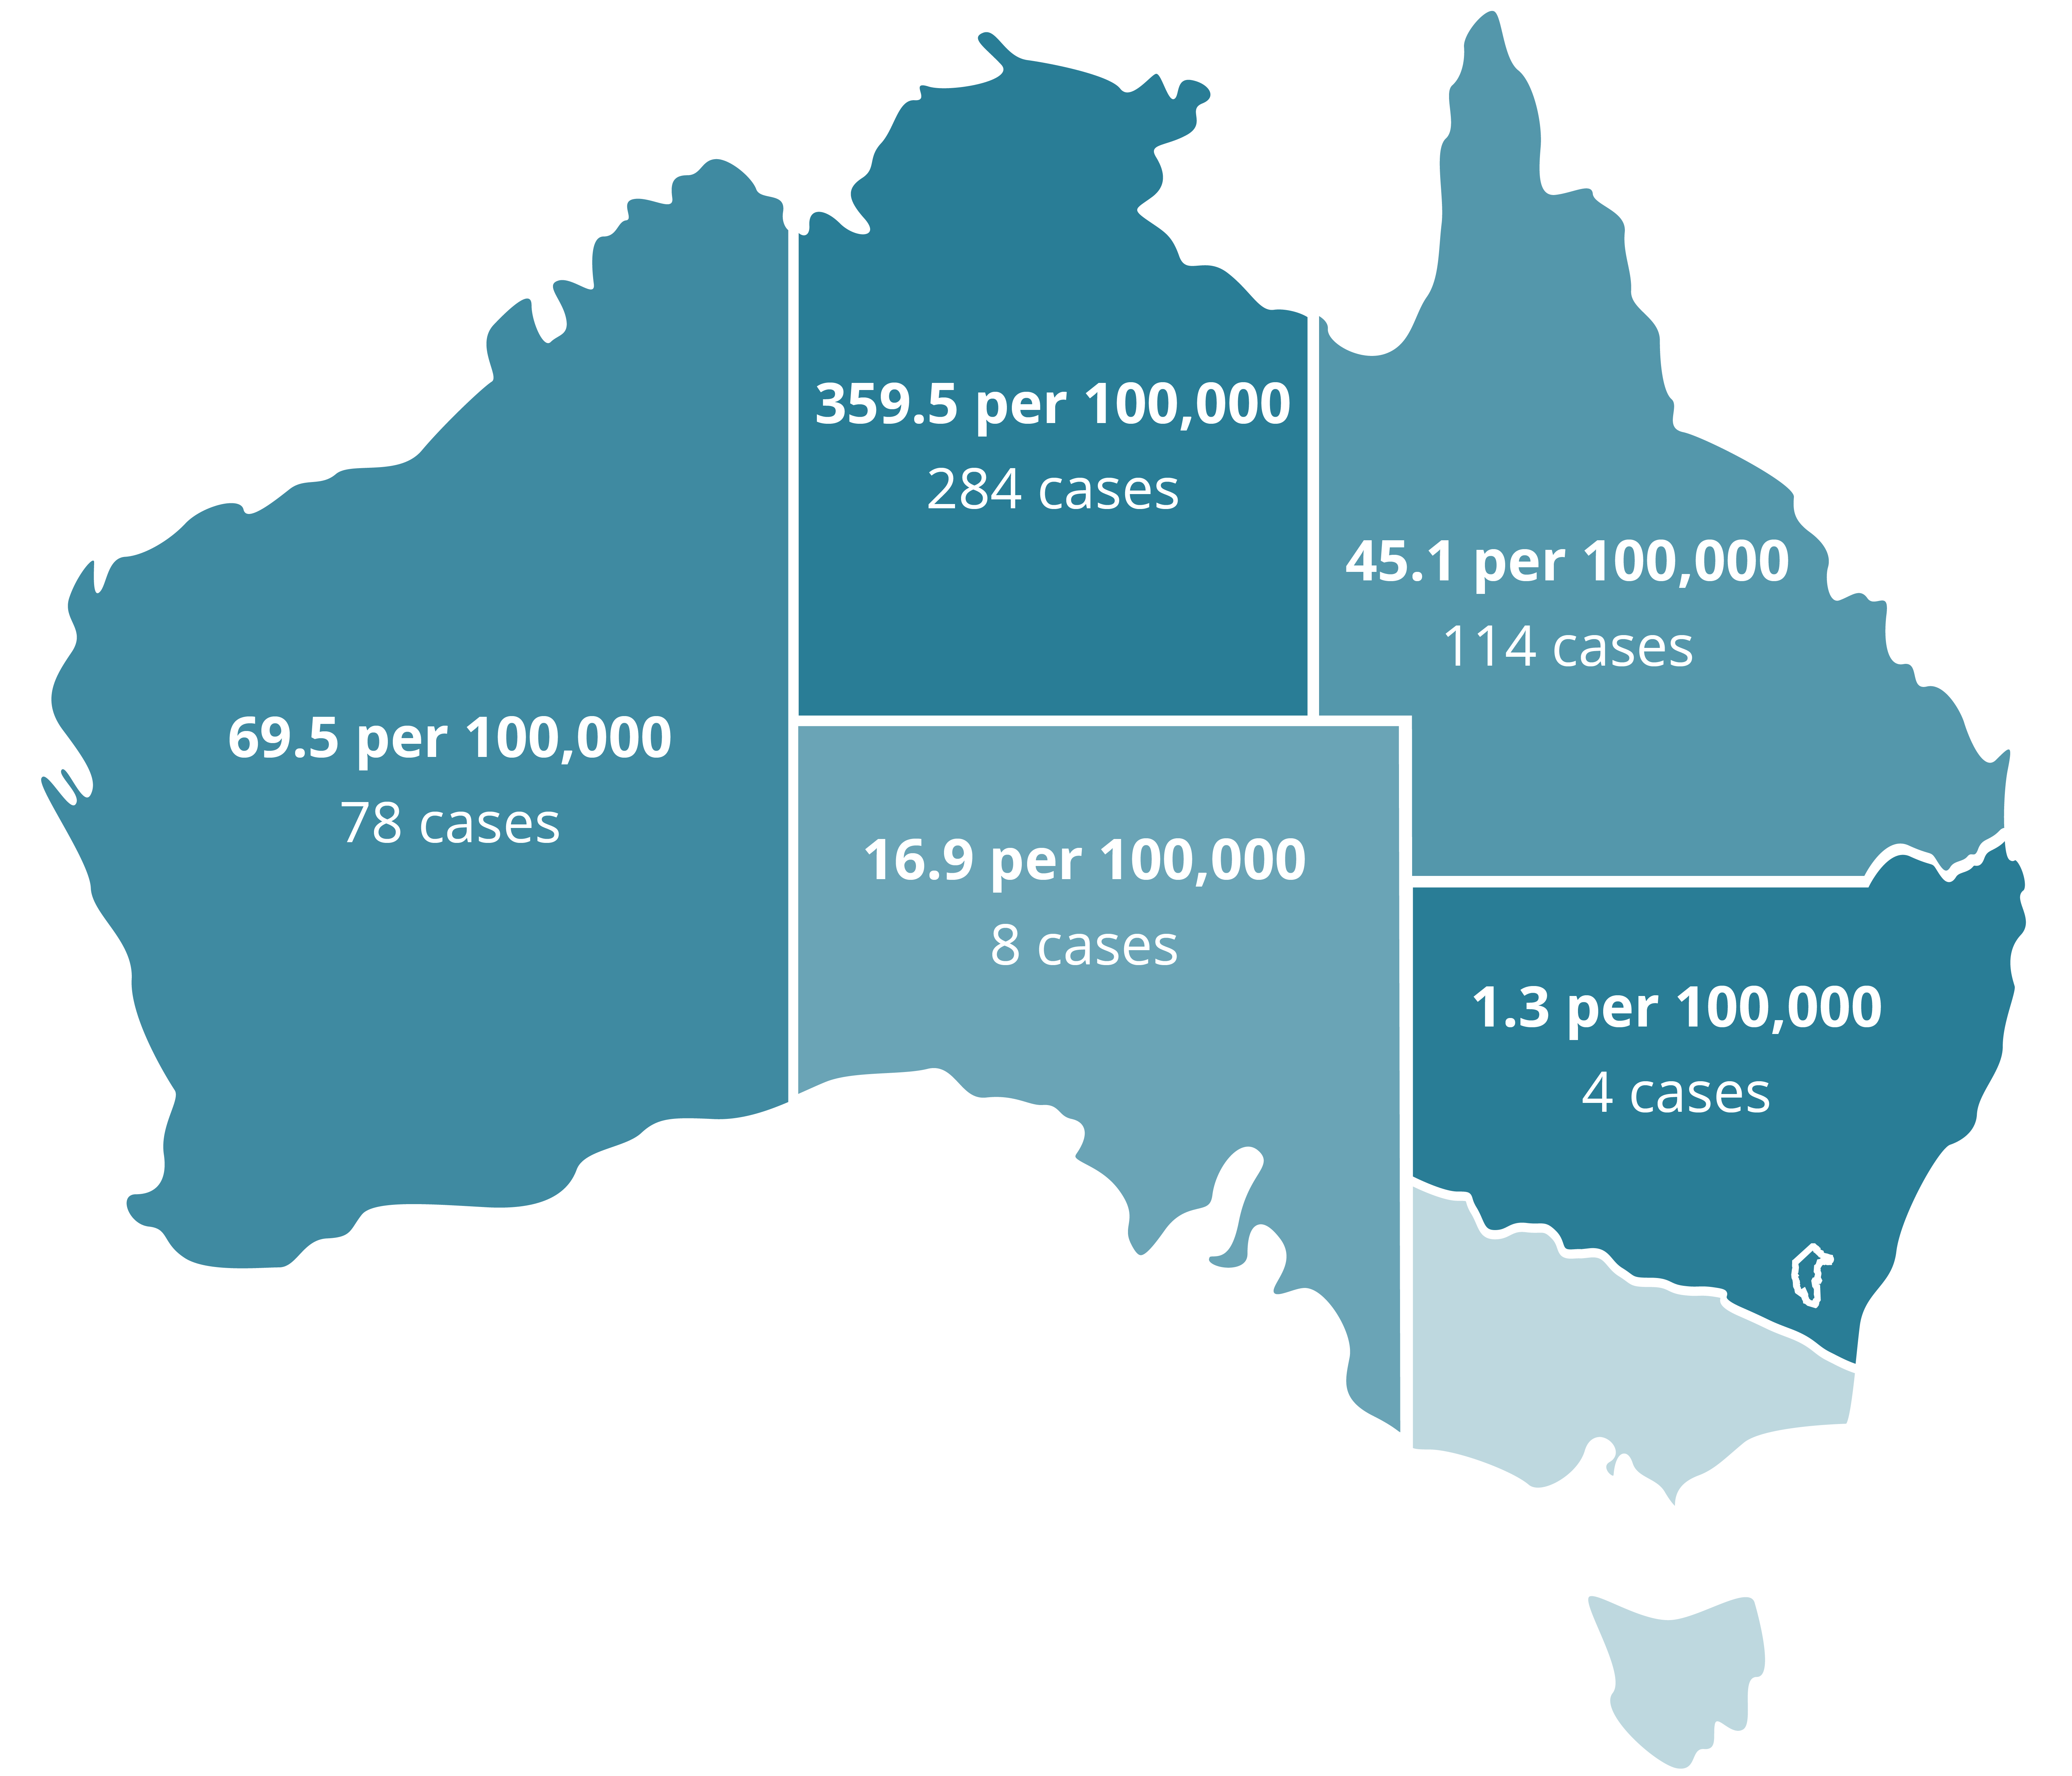 A map showing the lowest rate and number are in NSW and the highest rate and number are in the Northern Territory.